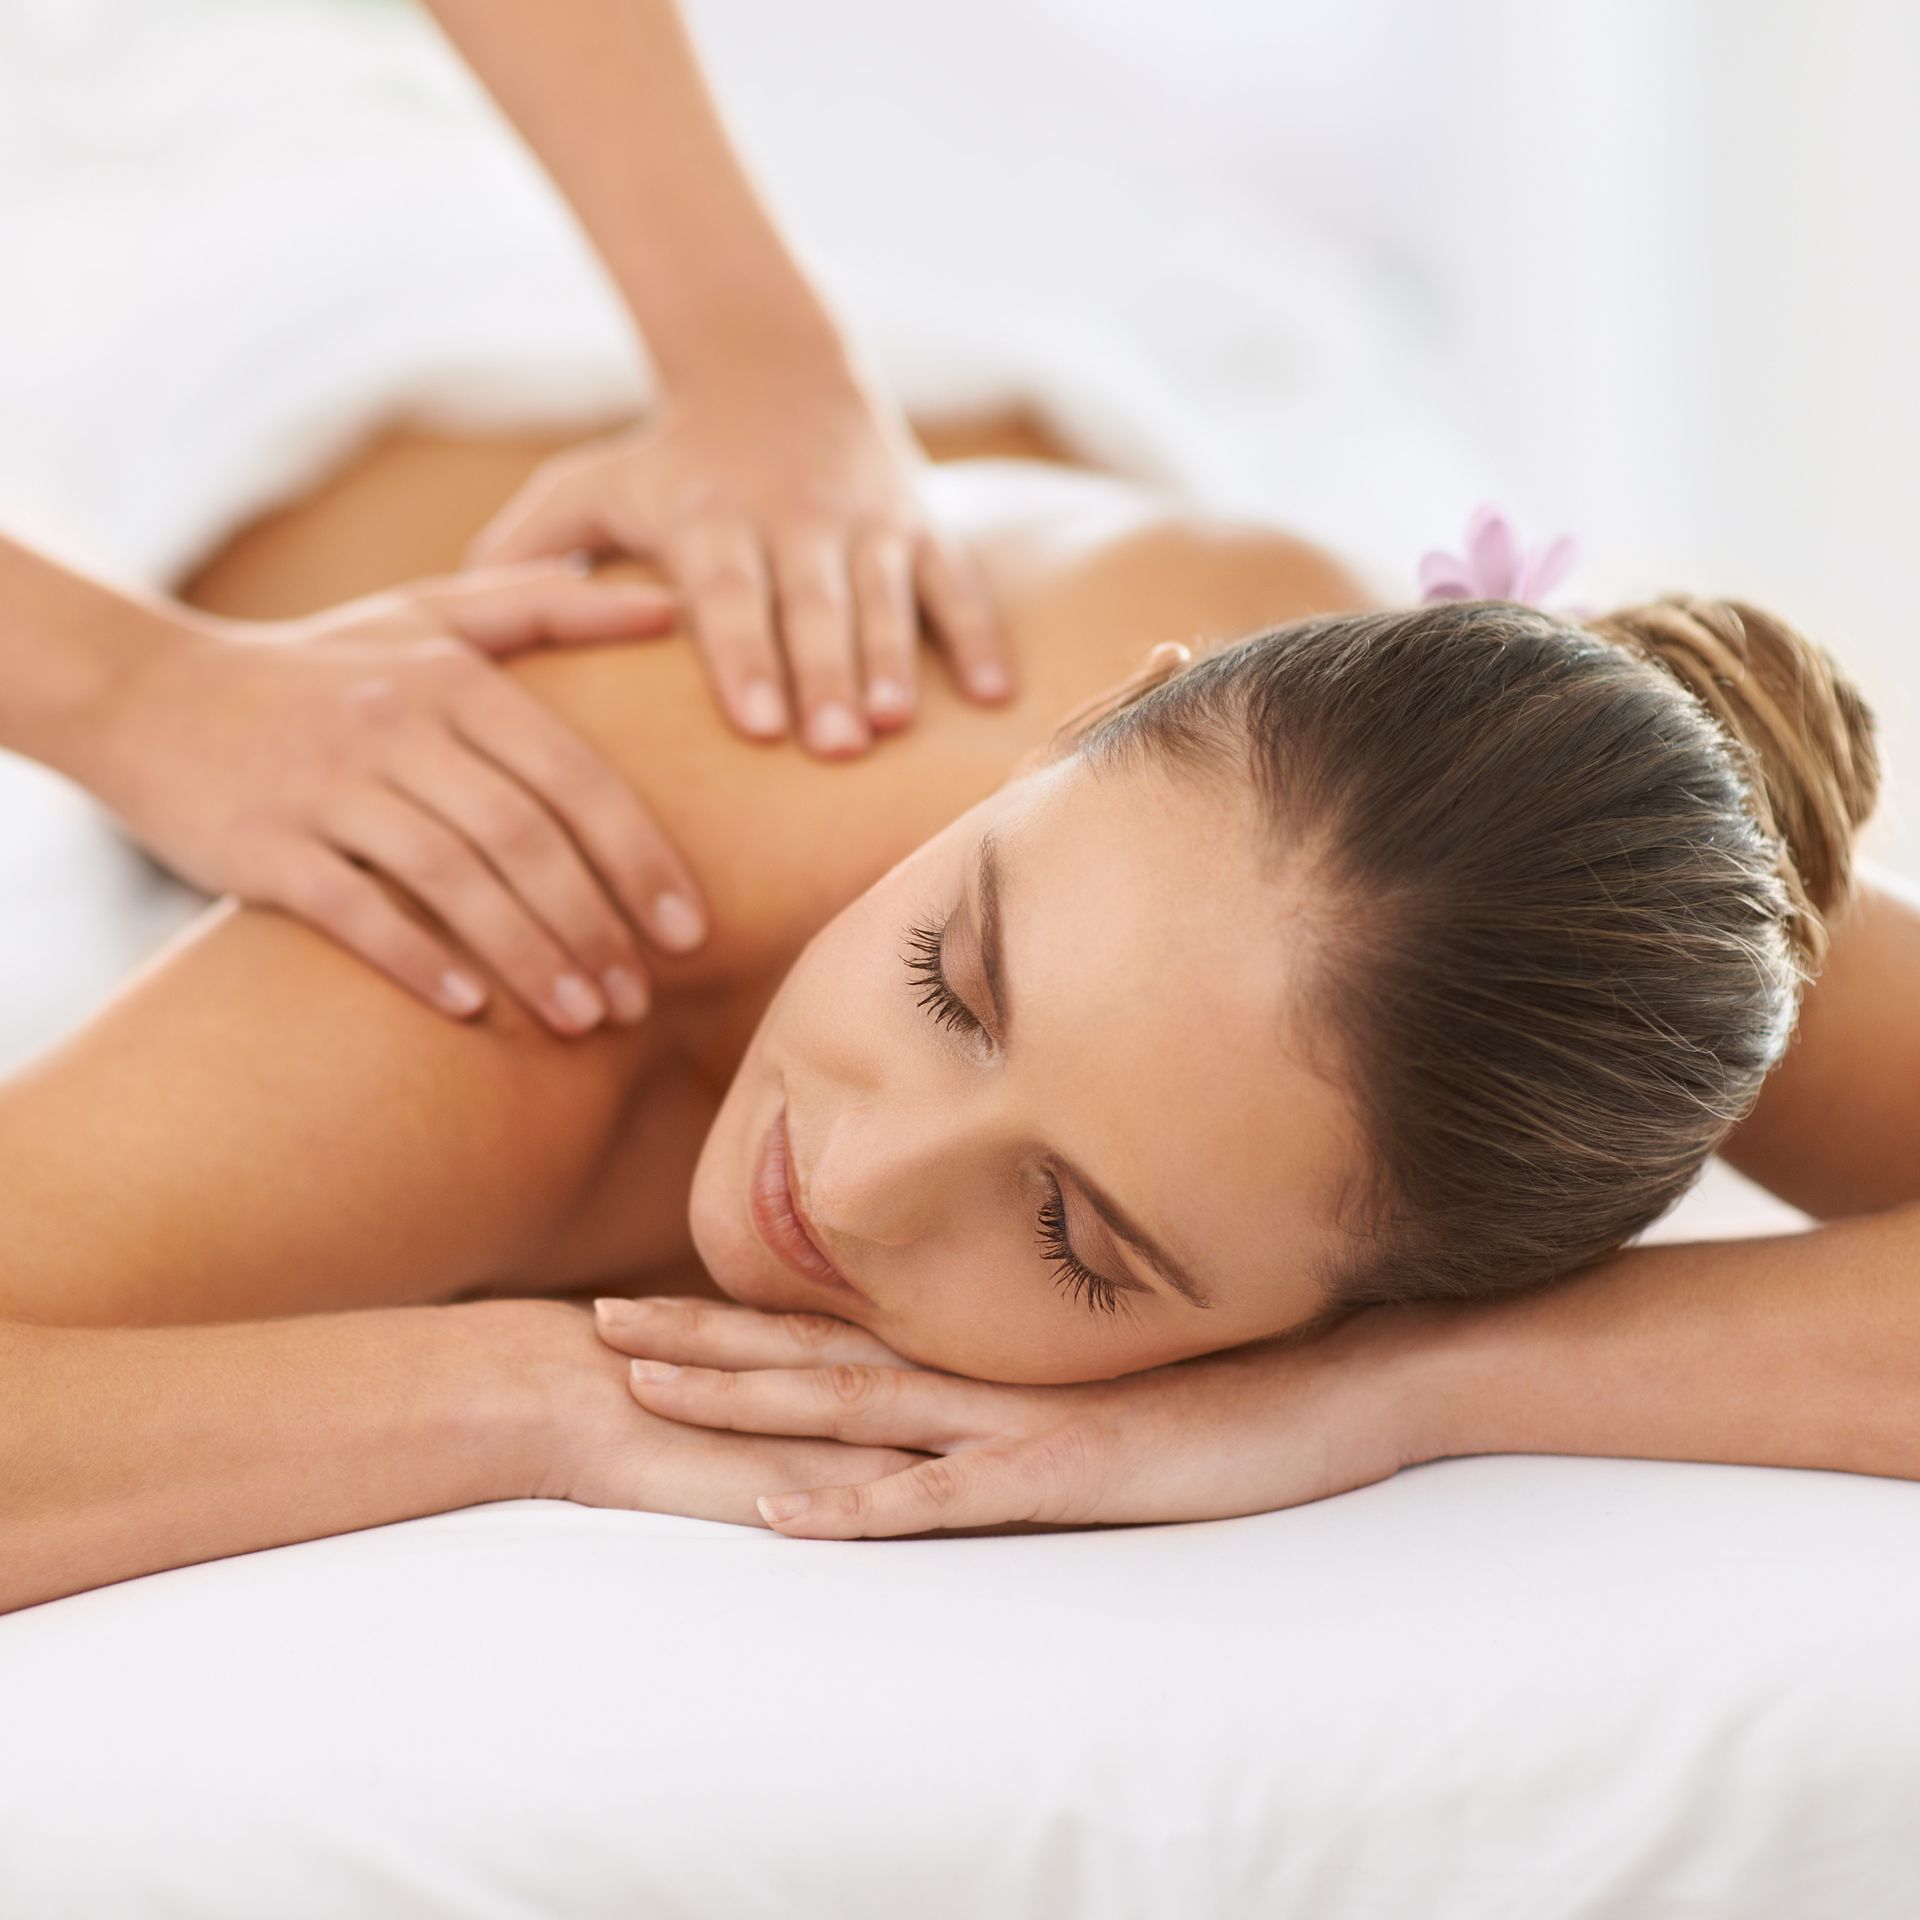 A woman is laying on a bed getting a massage